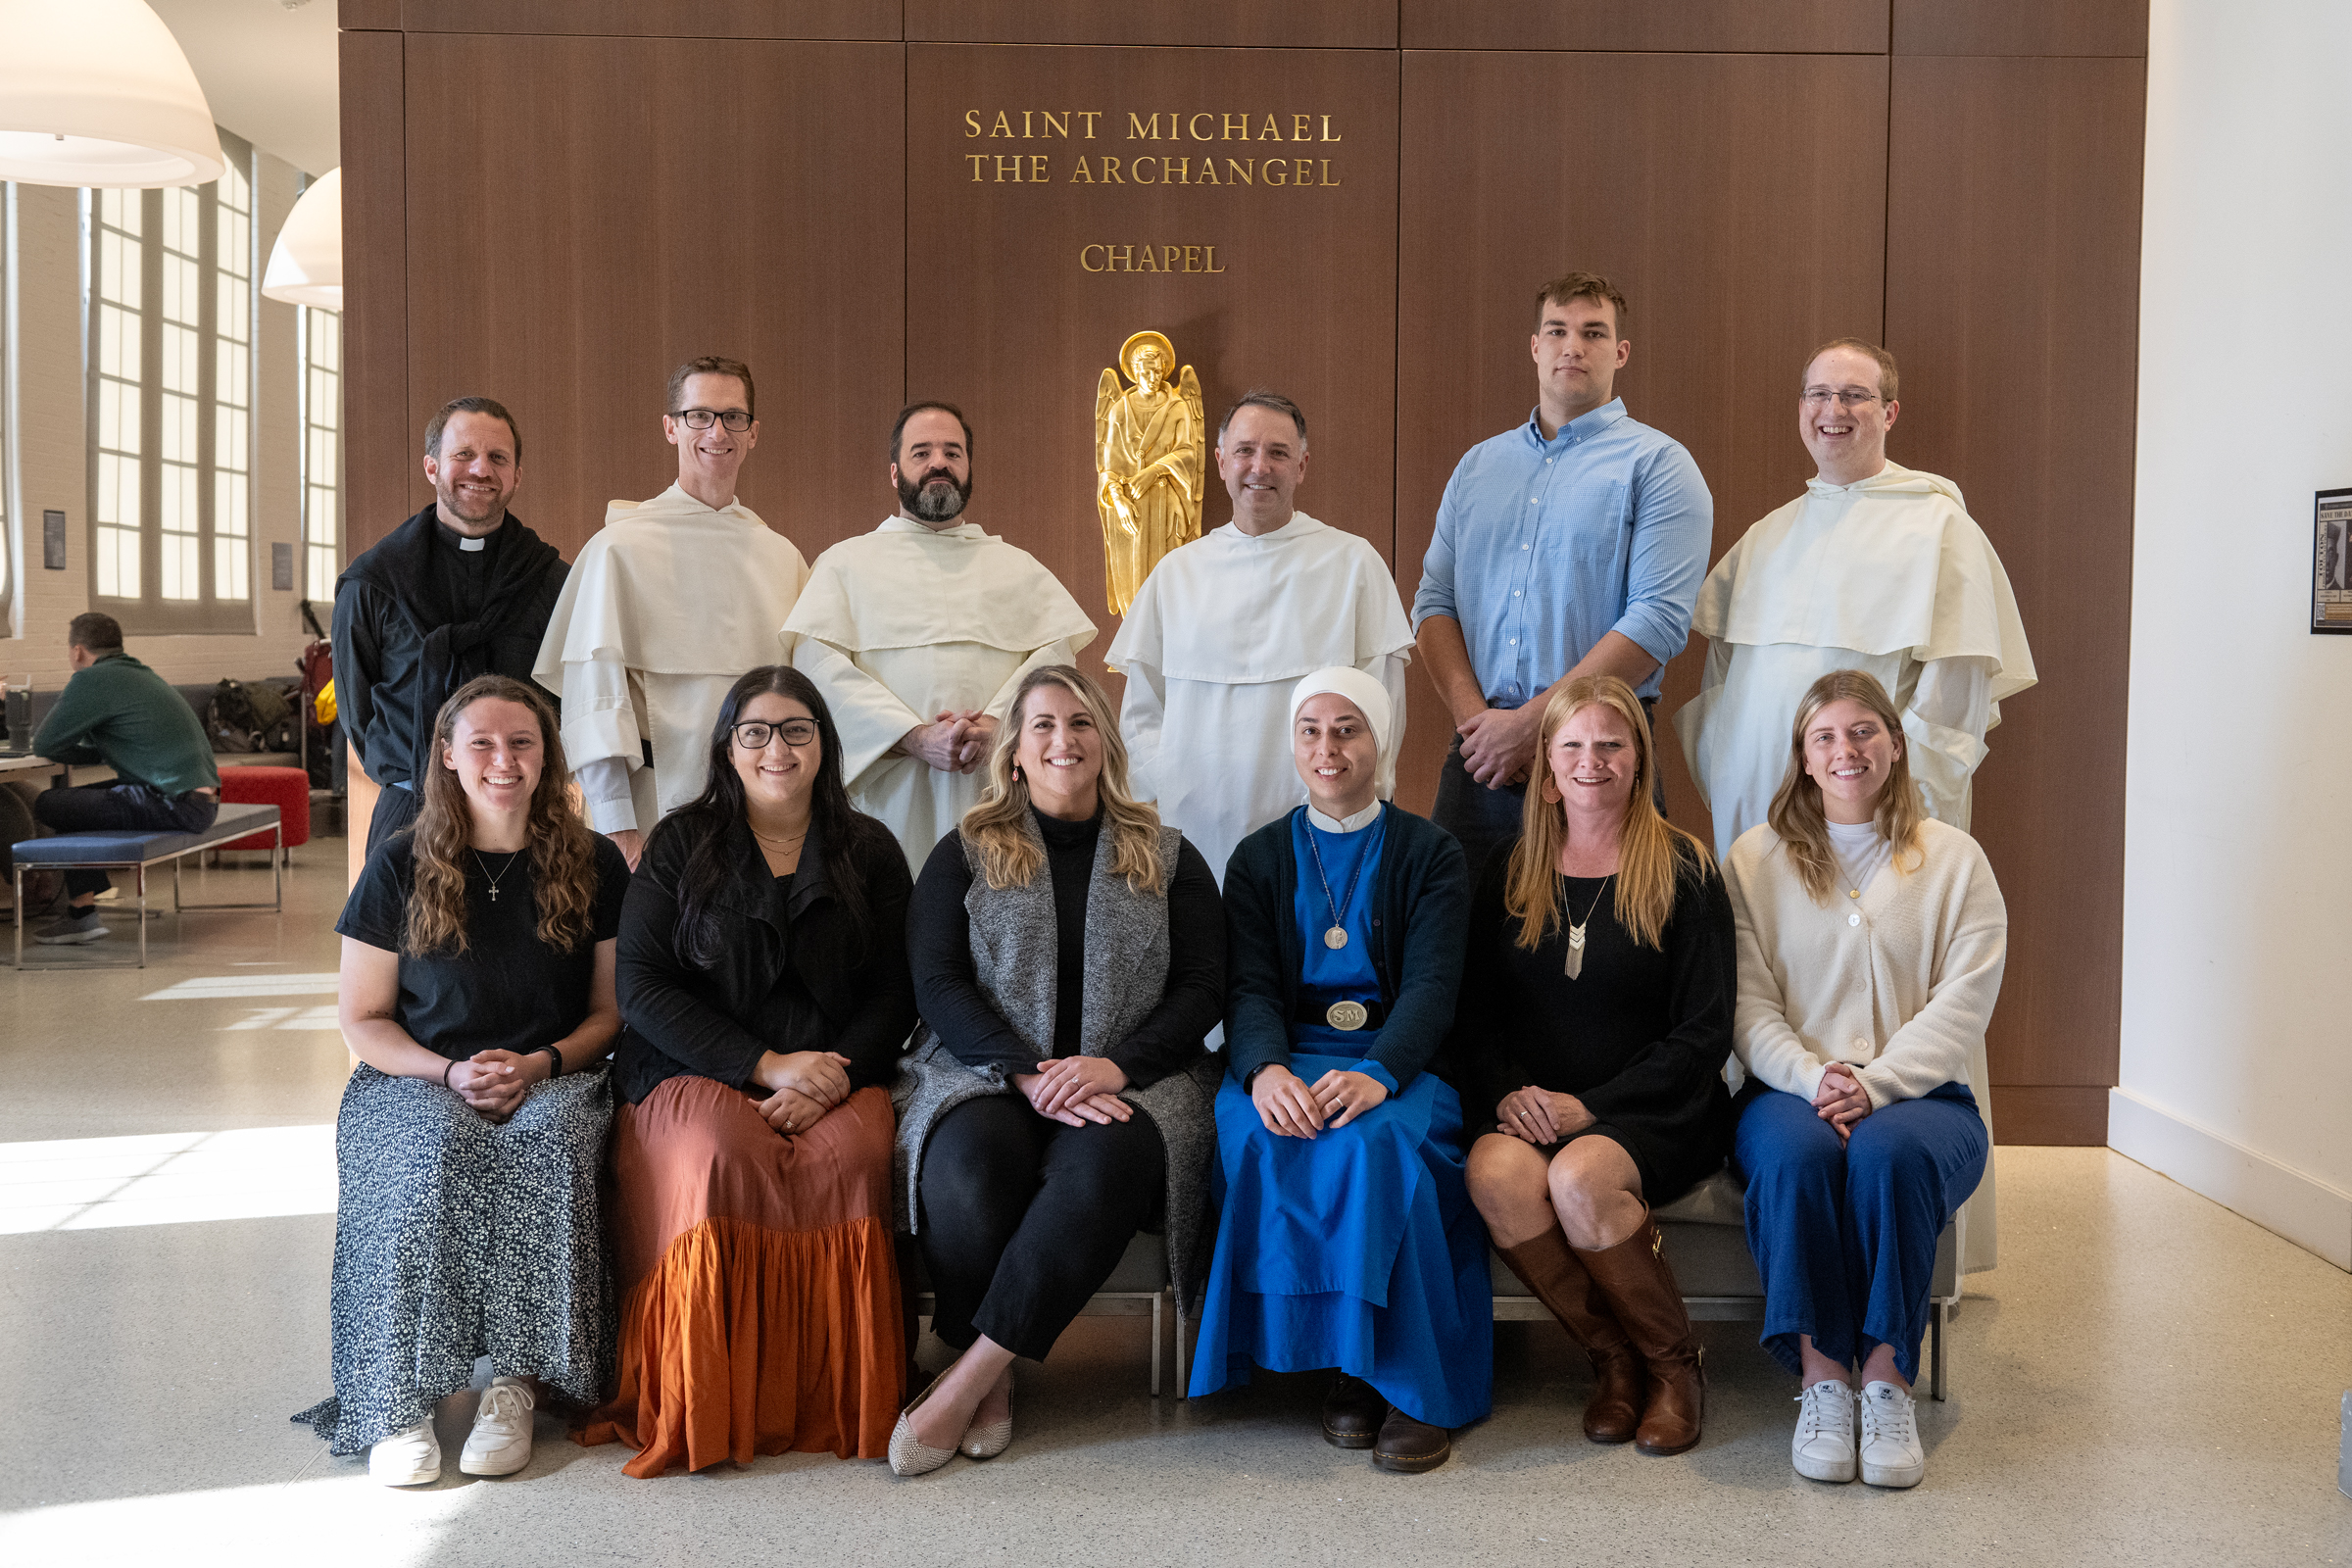 (Most of) The Campus Ministry Staff